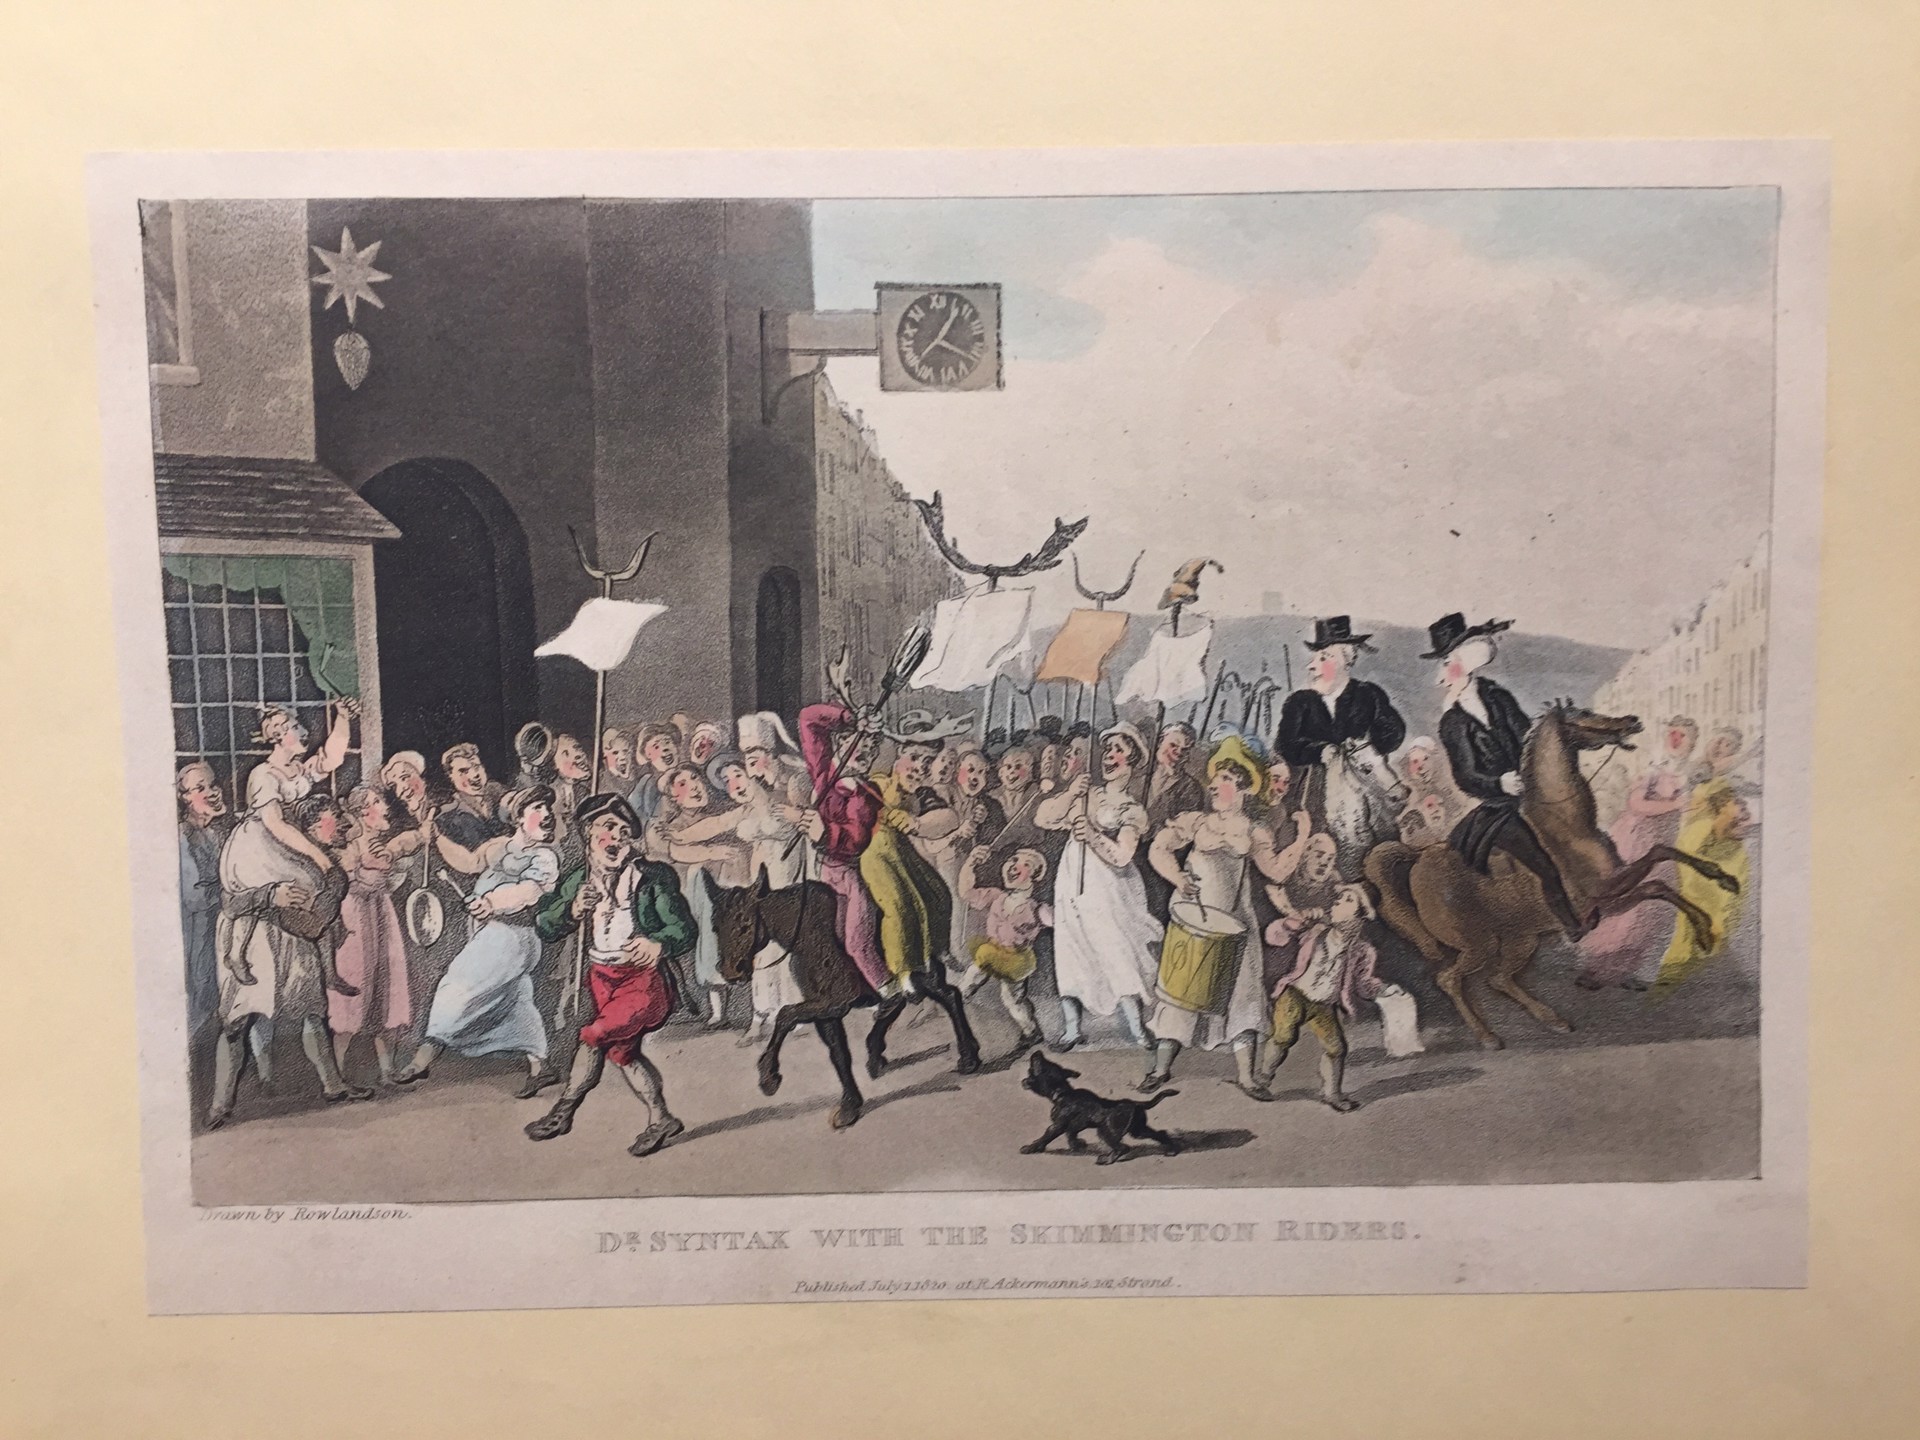 Dr Syntax and the Skimmington Riders by Thomas Rowlandson